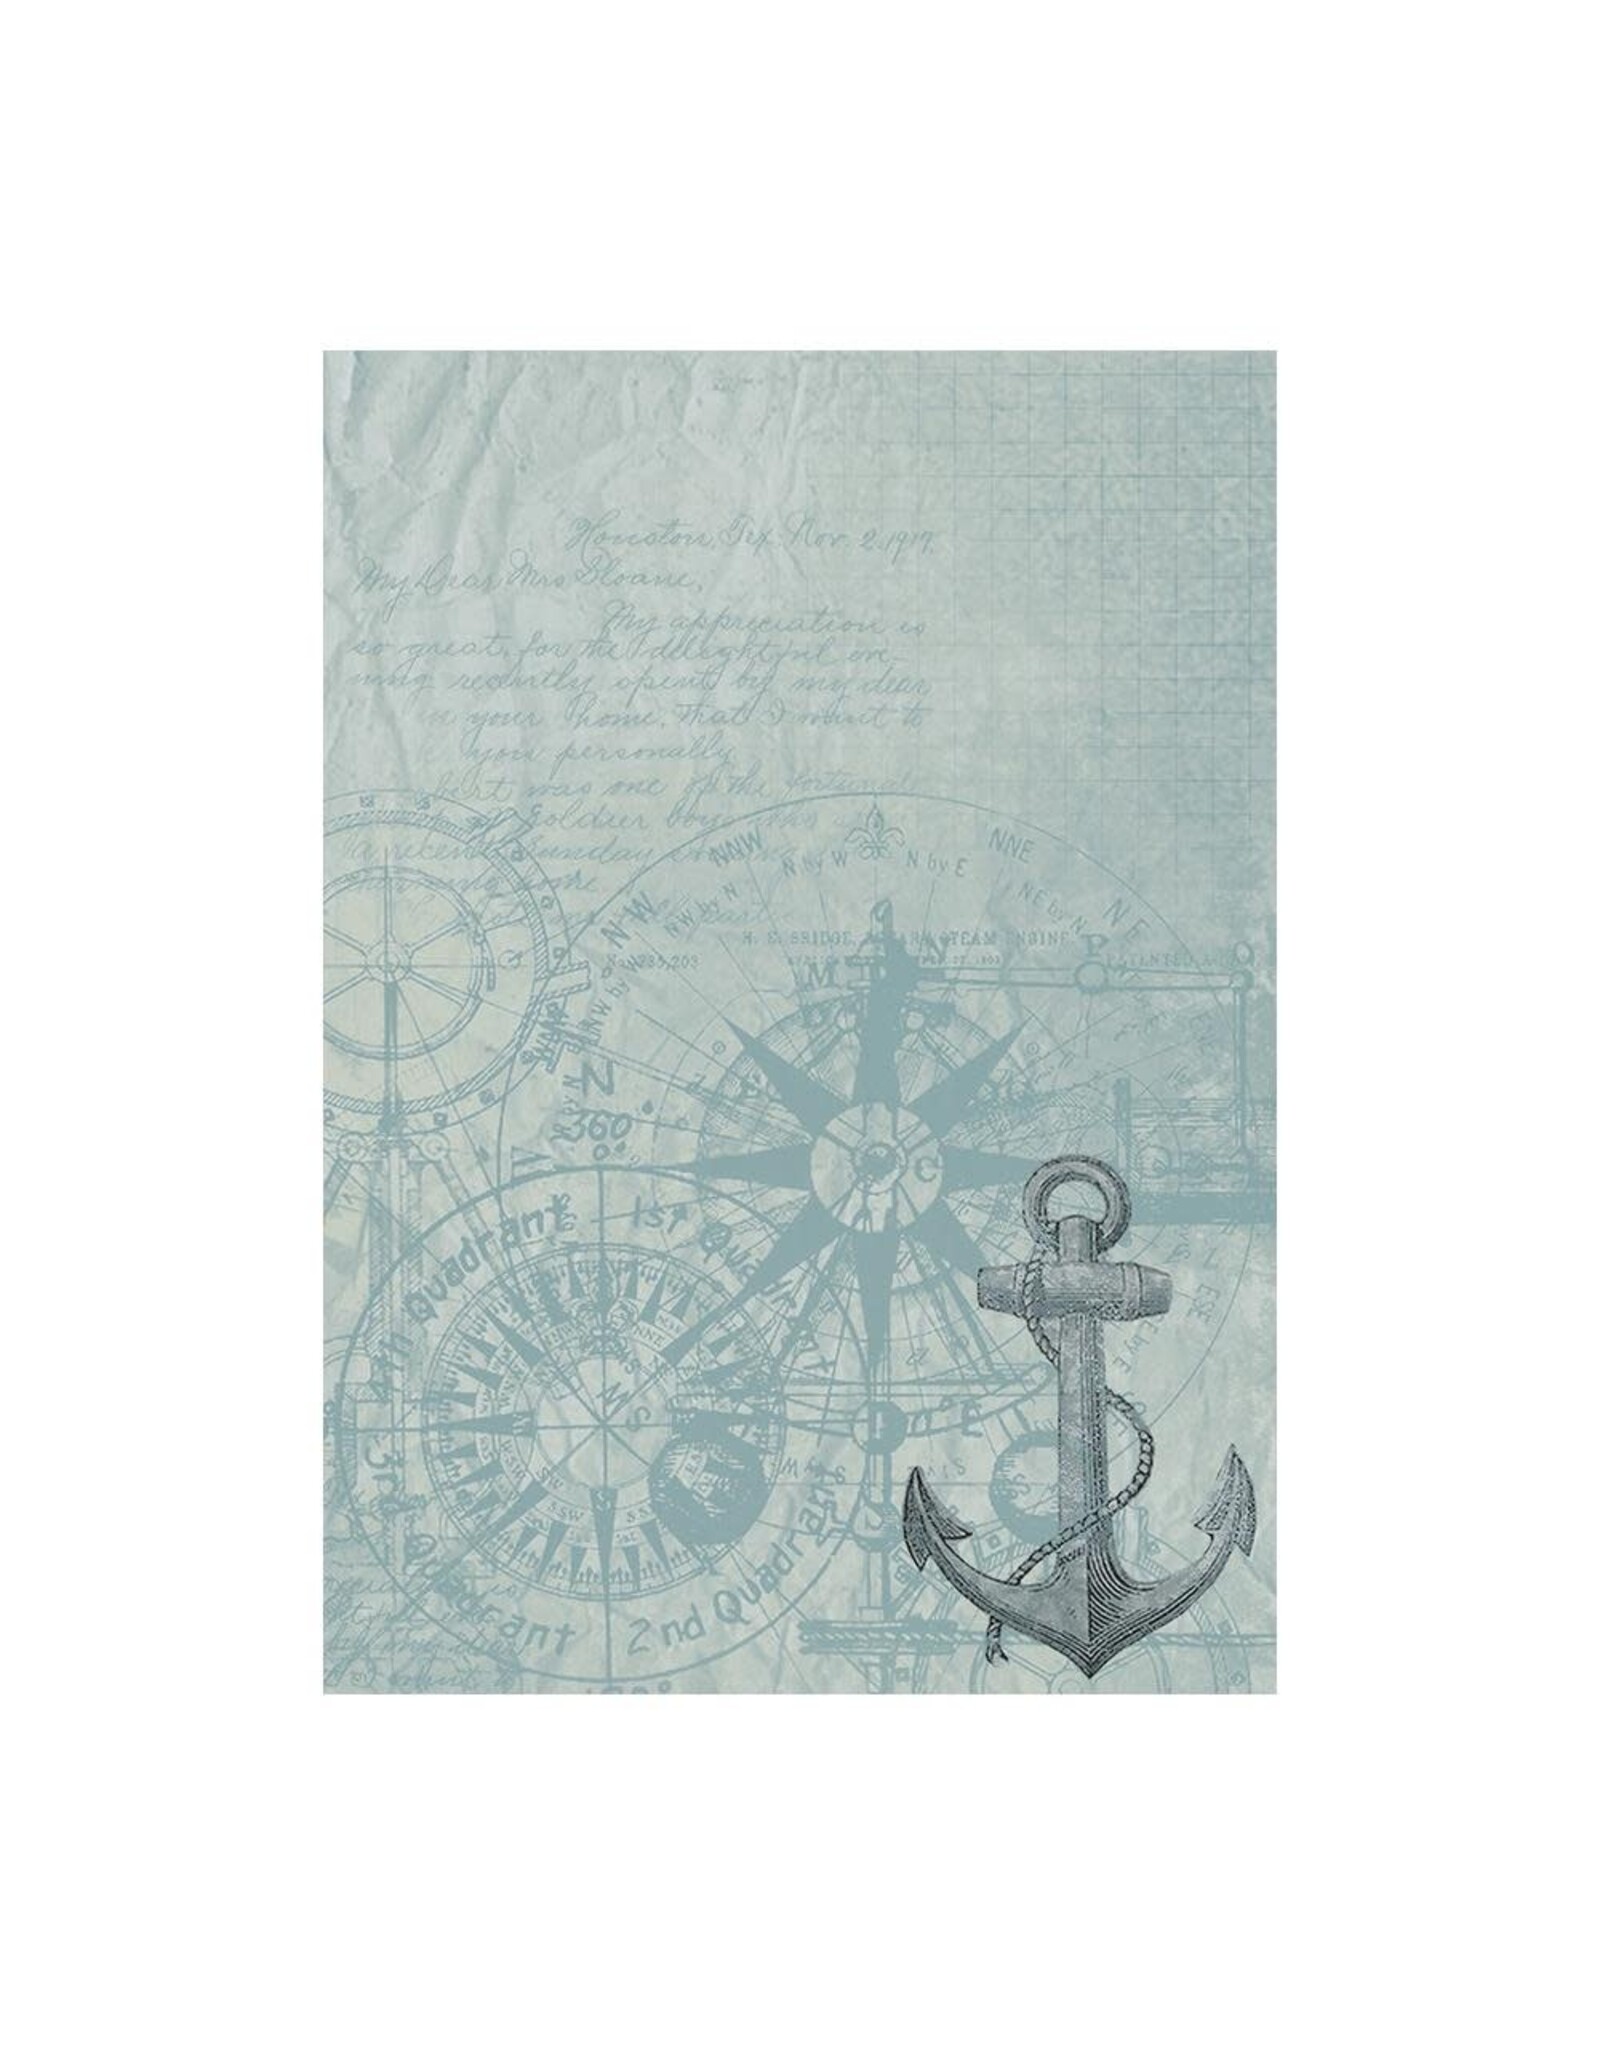 STAMPERIA STAMPERIA SEA LAND ASSORTED A6 RICE PAPER DECOUPAGE BACKGROUNDS 10.5X14.8CM 8/PK